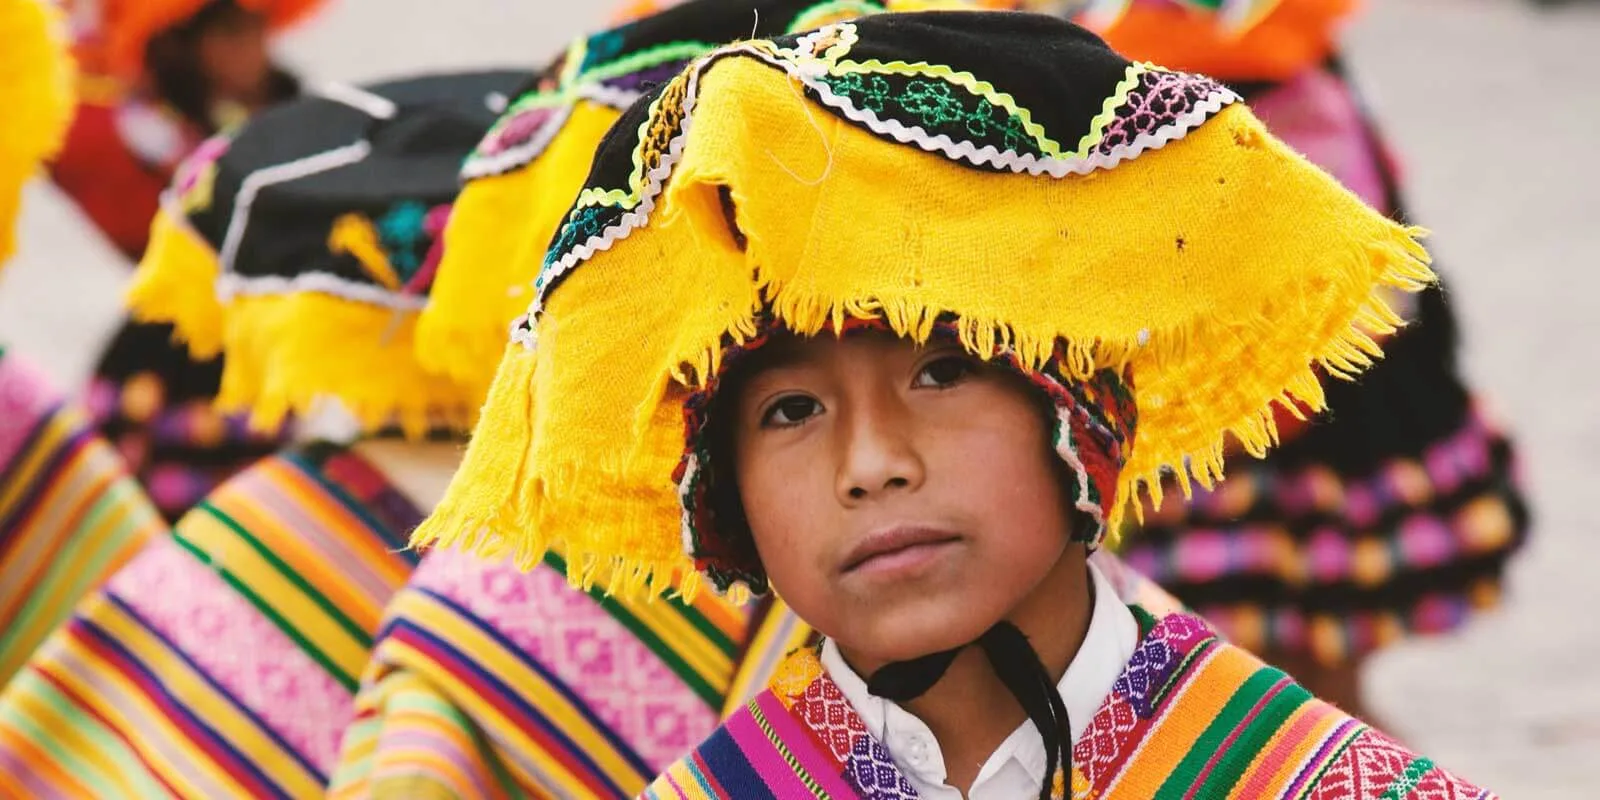 Closeup of a Peruvian child wearing colorful woven hat and clothing.